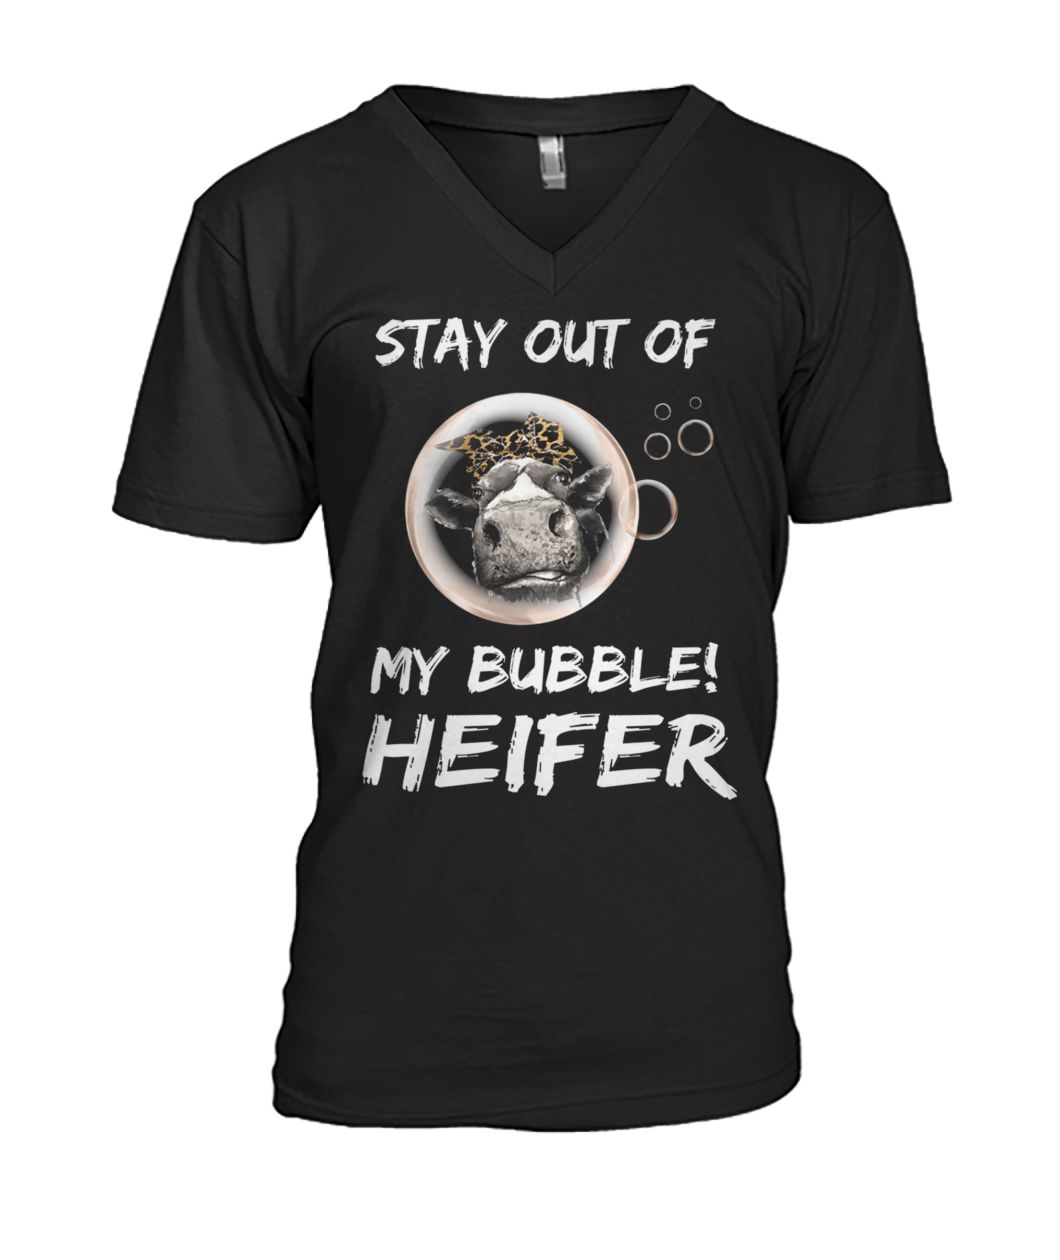 Stay out of my bubble heifer mens v-neck